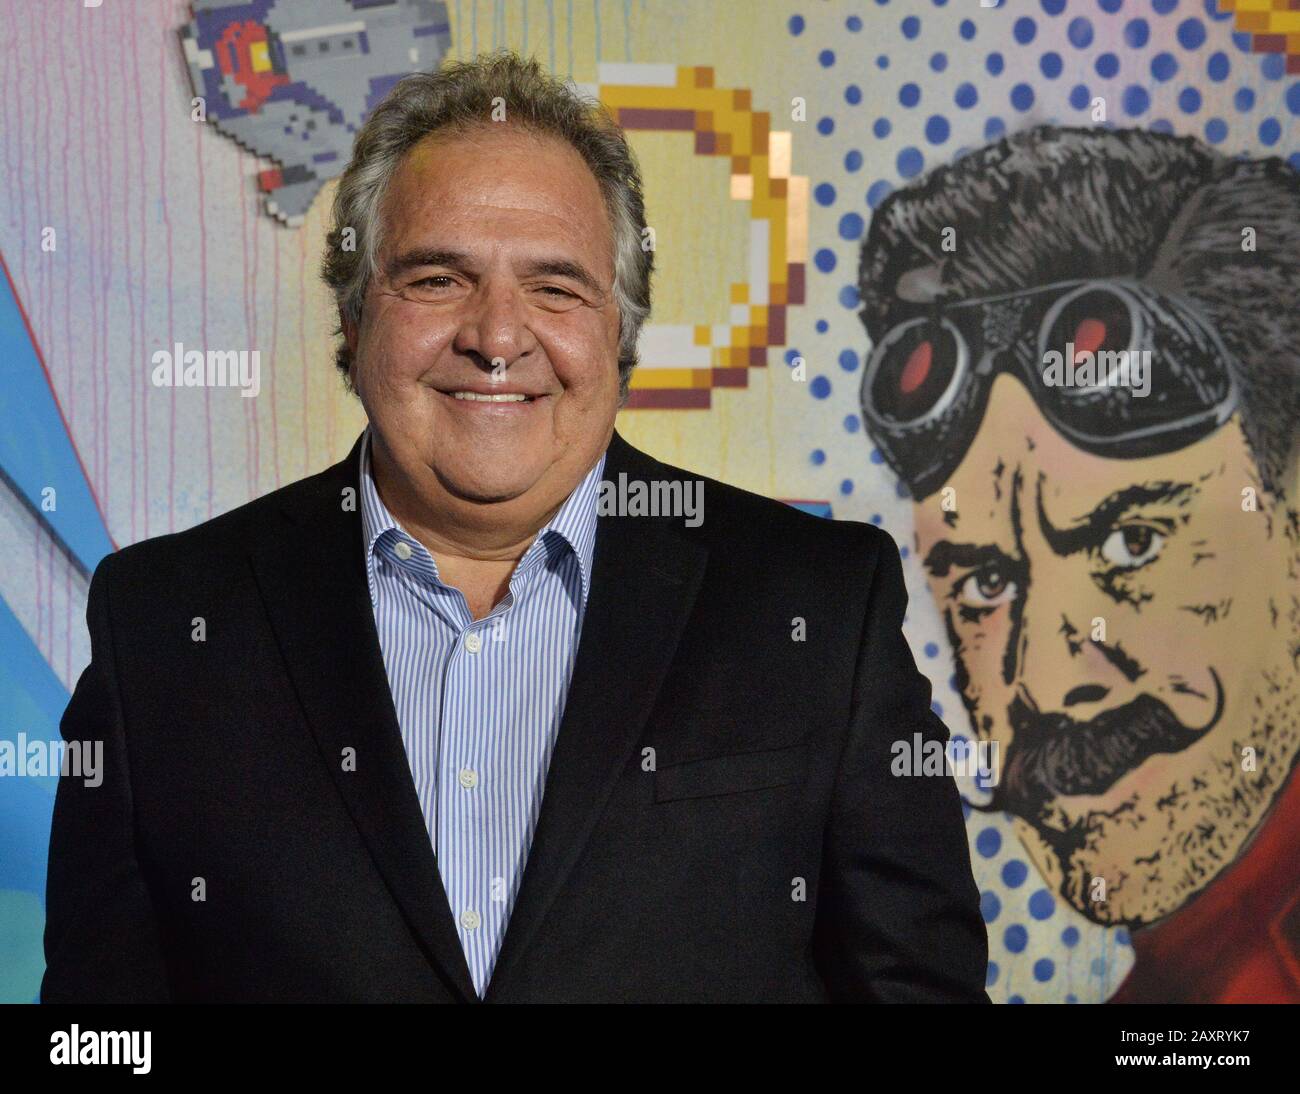 Jim Gianopulos, chairman and chief executive officer of Paramount Picture attends a special screening of the sci-fi family comedy adventure film 'Sonic the Hedgehog' at the Regency Village Theatre in the Westwood section of Los Angeles on Wednesday, February 12, 2020. Storyline: Based on the global blockbuster videogame franchise from Sega, 'Sonic' tells the story of the world's speediest hedgehog as he embraces his new home on Earth. In this live-action adventure comedy, Sonic and his new best friend Tom (James Marsden) team up to defend the planet from the evil genius Dr. Robotnik (Jim Carre Stock Photo